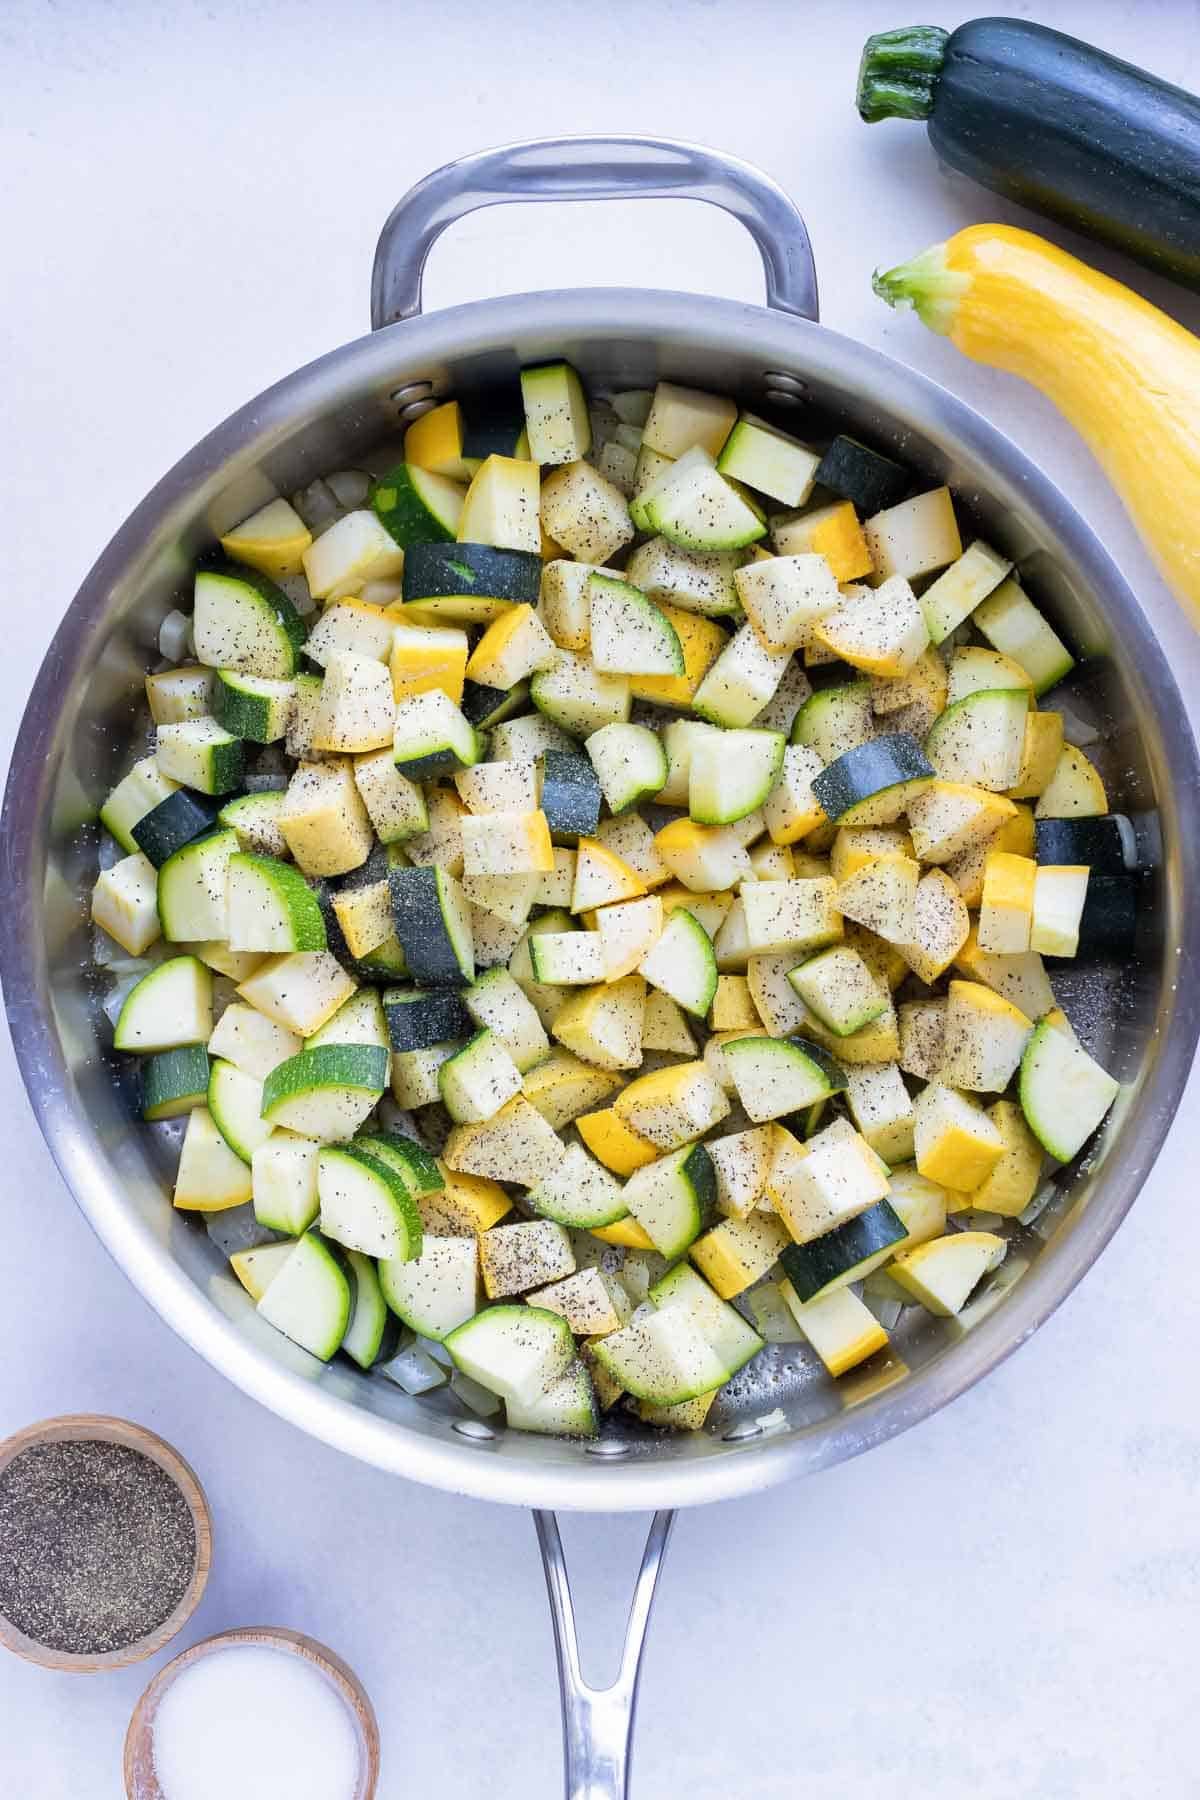 Zucchini and squash are added to the skillet.